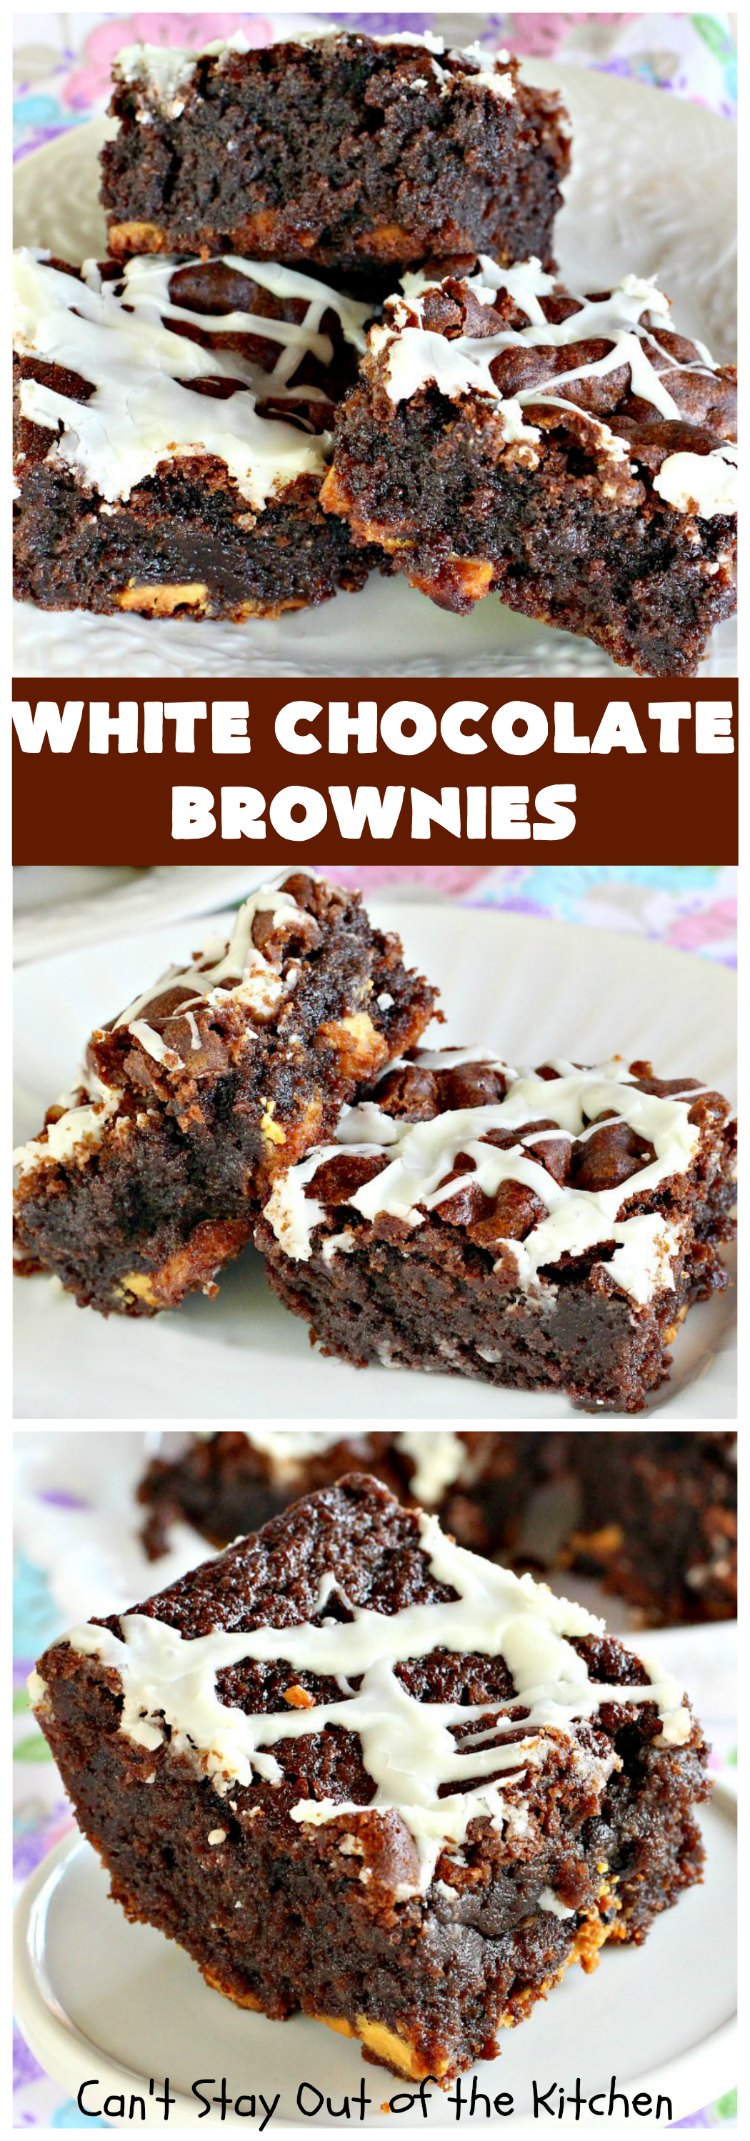 White Chocolate Brownies | Can't Stay Out of the Kitchen | these spectacular #brownies have 5X the #chocolate with #cocoa, chocolate extract, #Hersheys #ChocolateSyrup, #WhiteChocolateChips & #WhiteChocolate icing. They are rich, decadent & absolutely divine! Perfect for #holidays, potlucks, #tailgating parties & backyard BBQs. #cookies #ChocolateDessert #WhiteChocolateBrownies 